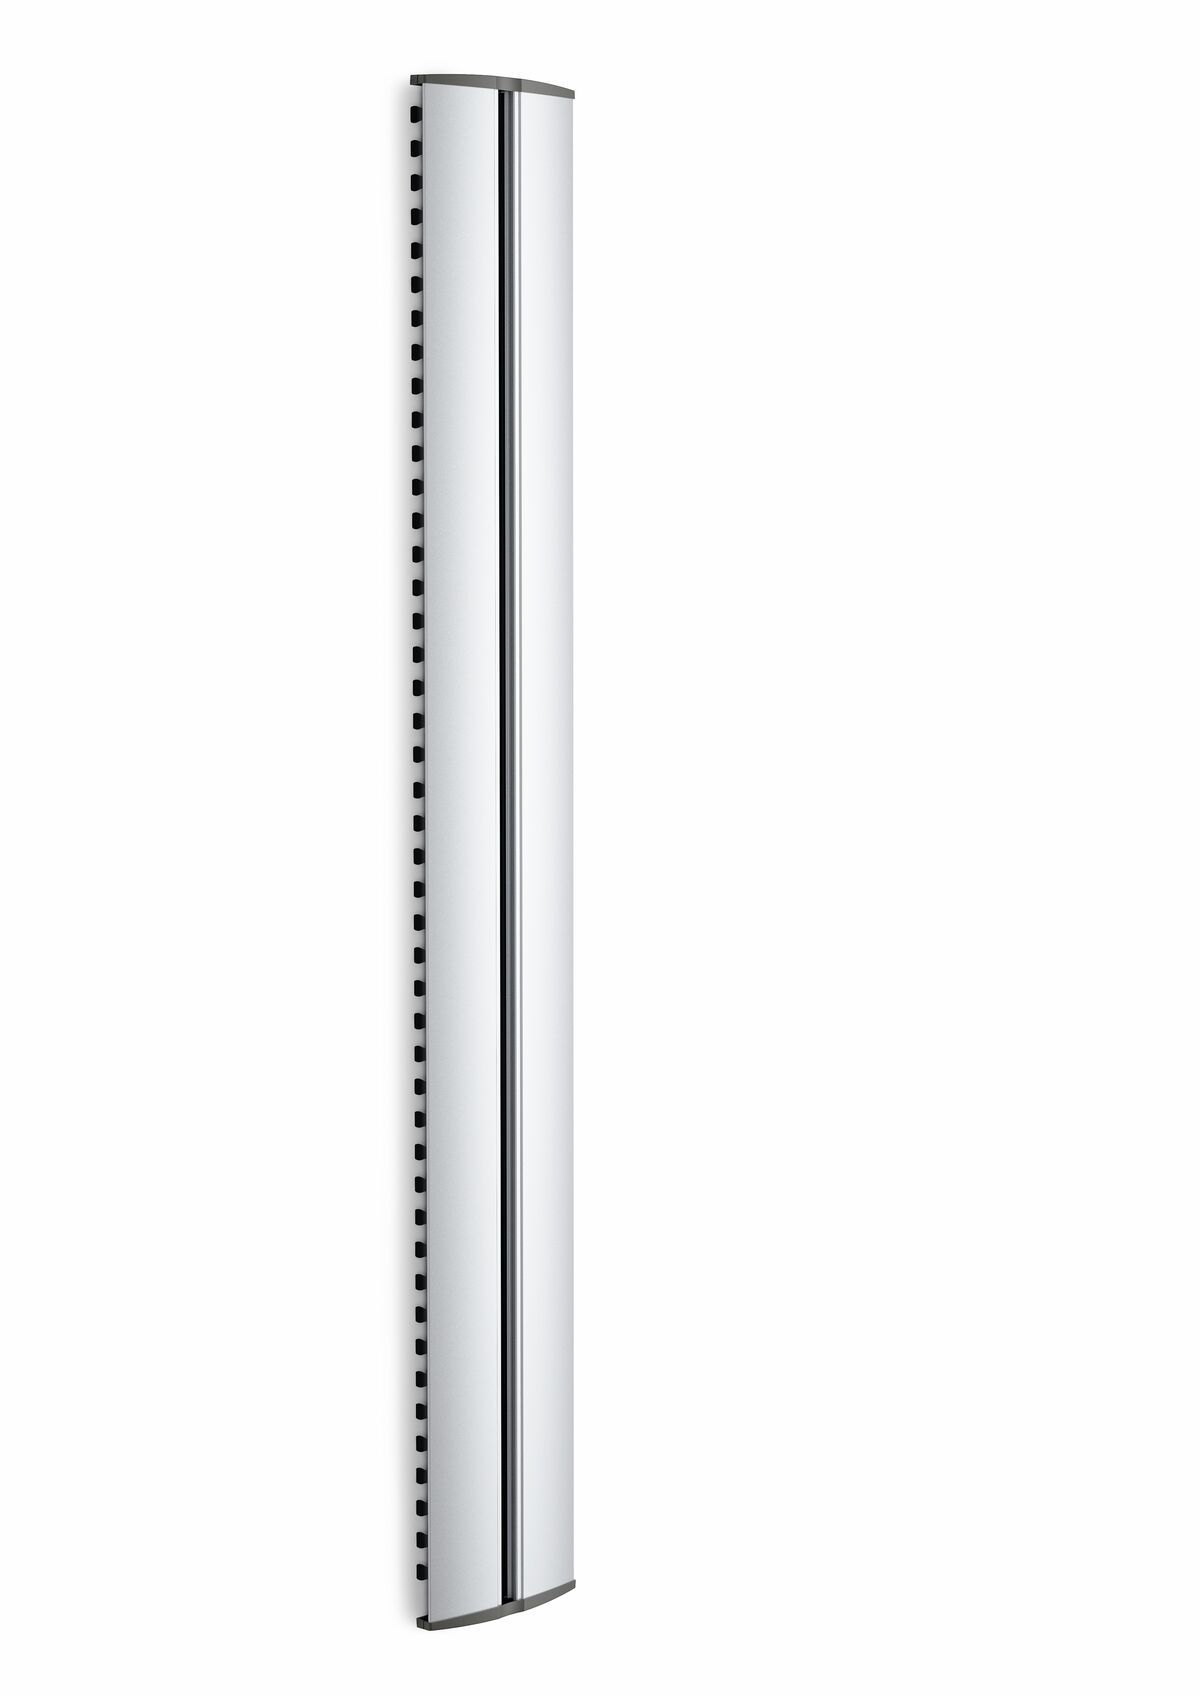 Vogel's CABLE 10 L Cable Column - Max. number of cables to hold: Up to 10 cables - Length: 94 cm - Product